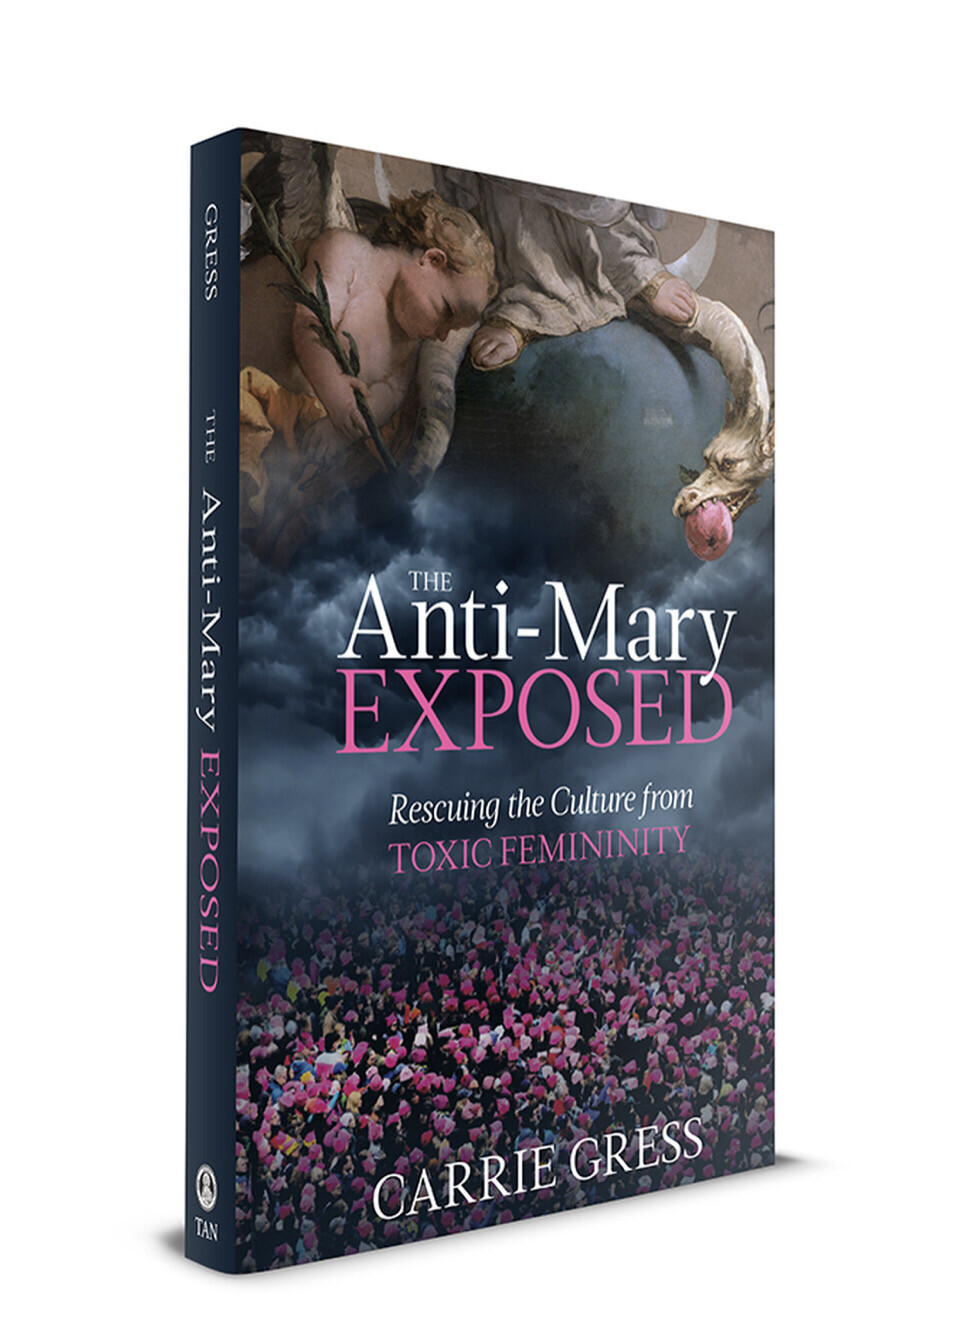 The Anti Mary Exposed: Saving the Culture from Toxic Femininity by Carrie Gress